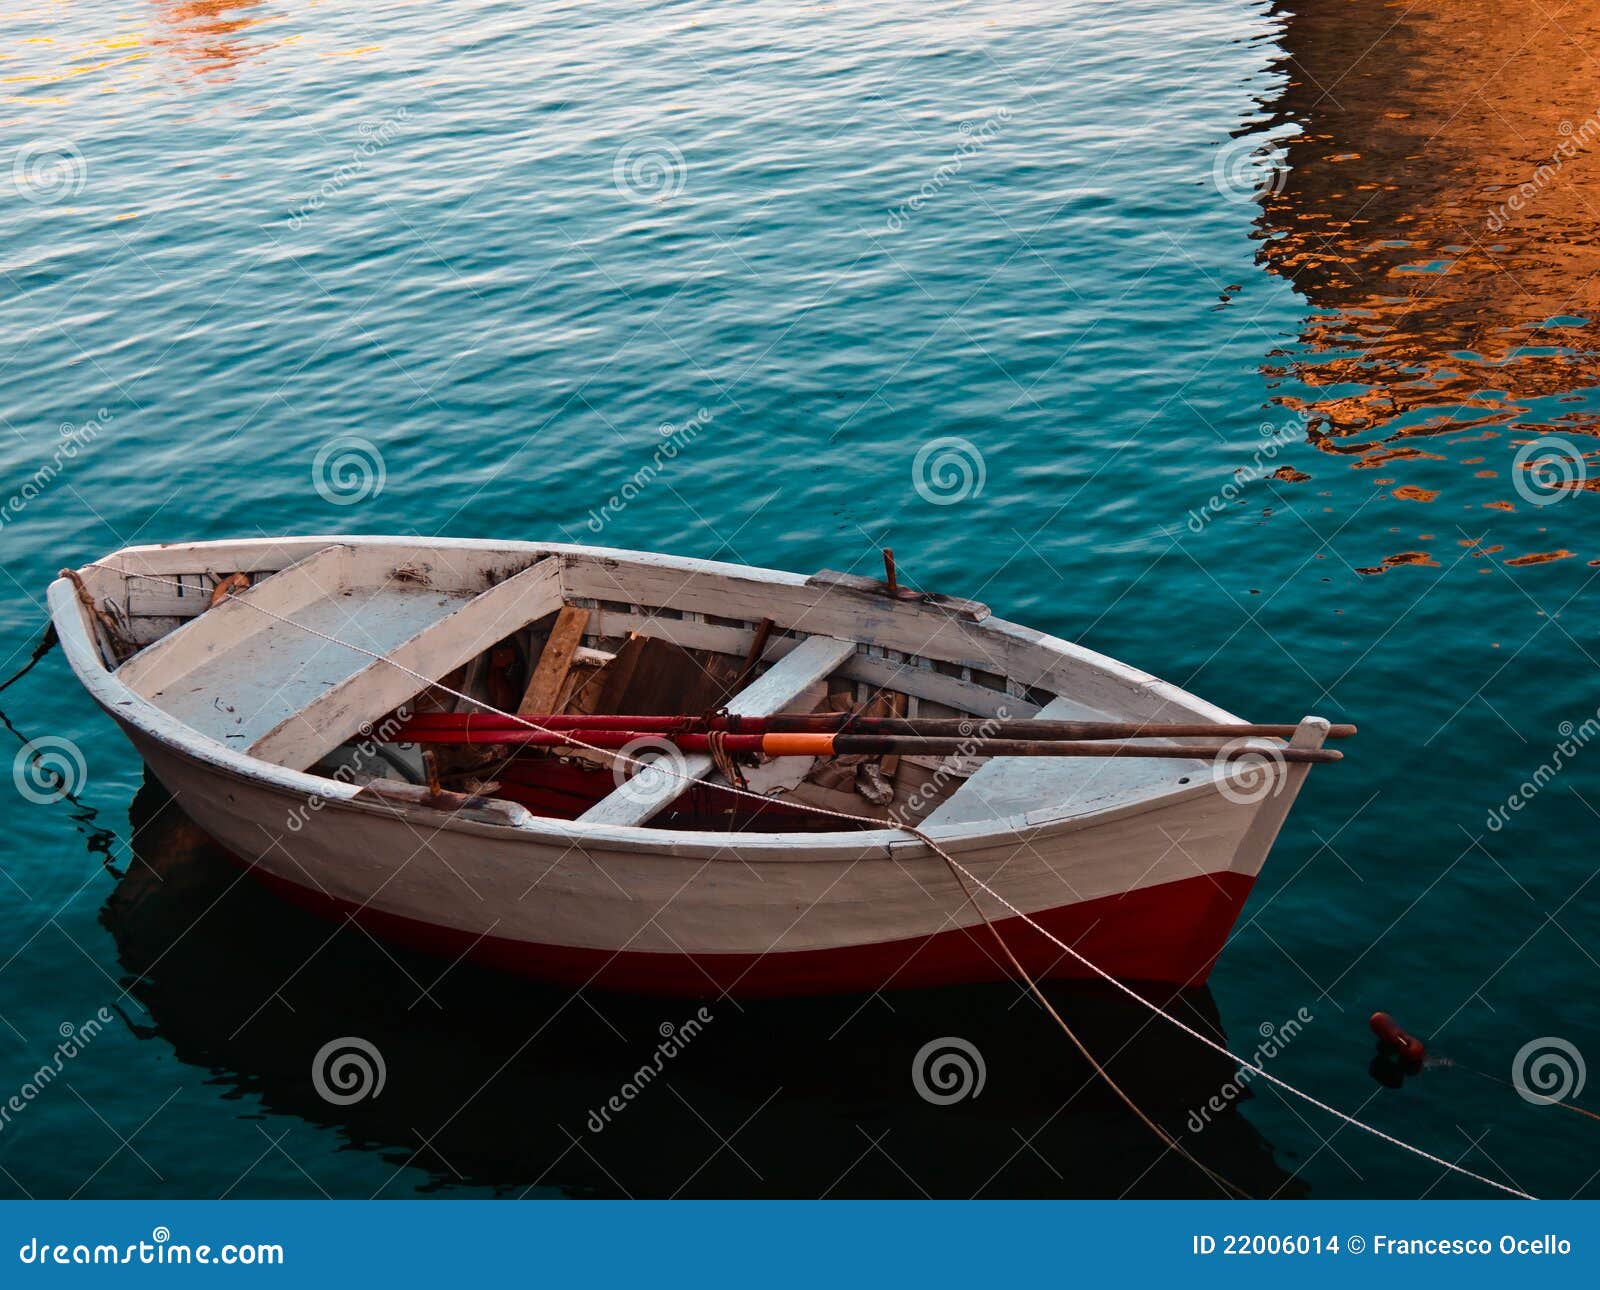 small fishing boat stock photo. image of clouds, serene